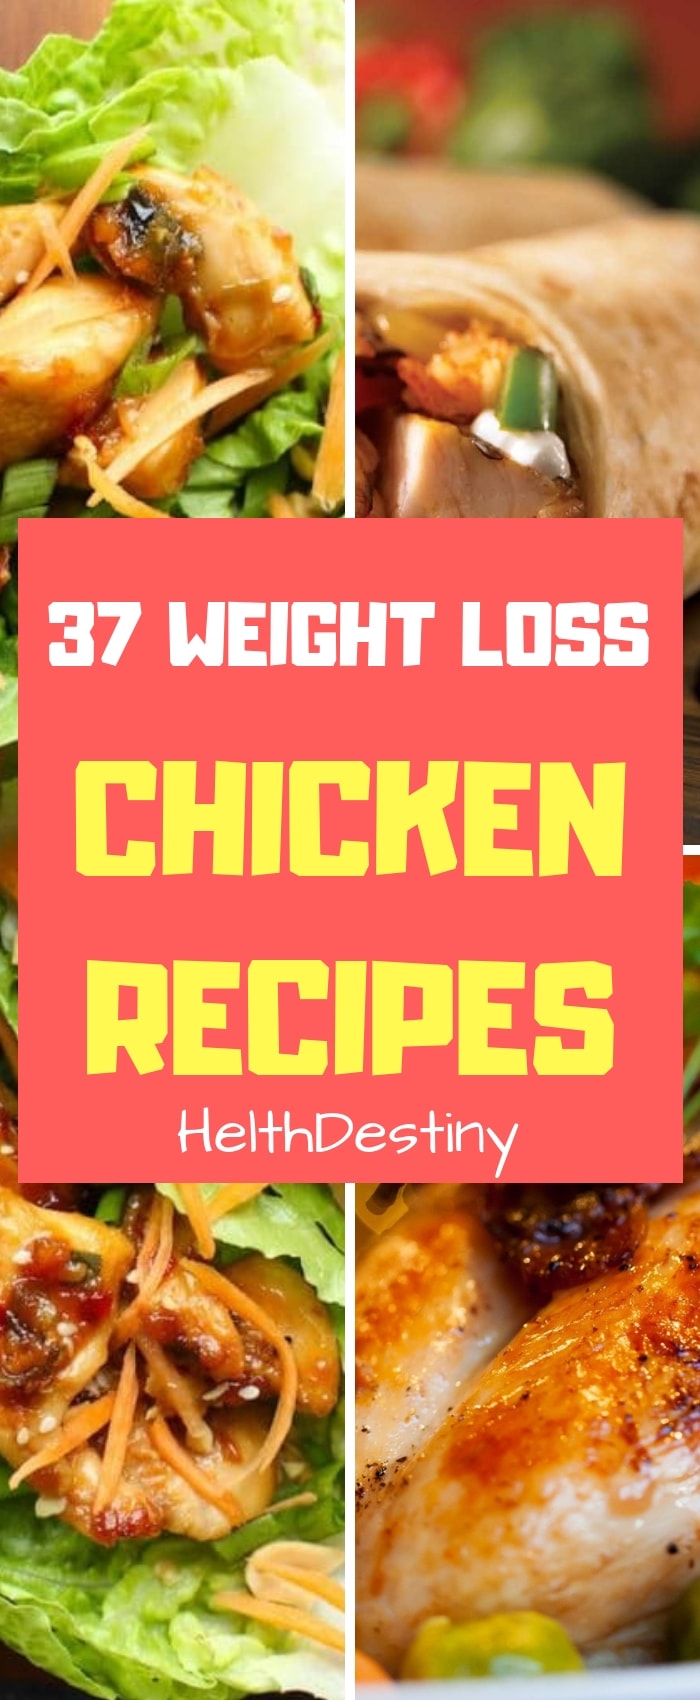 37 Chicken Breakfast Recipes for weight lost - The healthiest way to cook Chicken packed with Protein